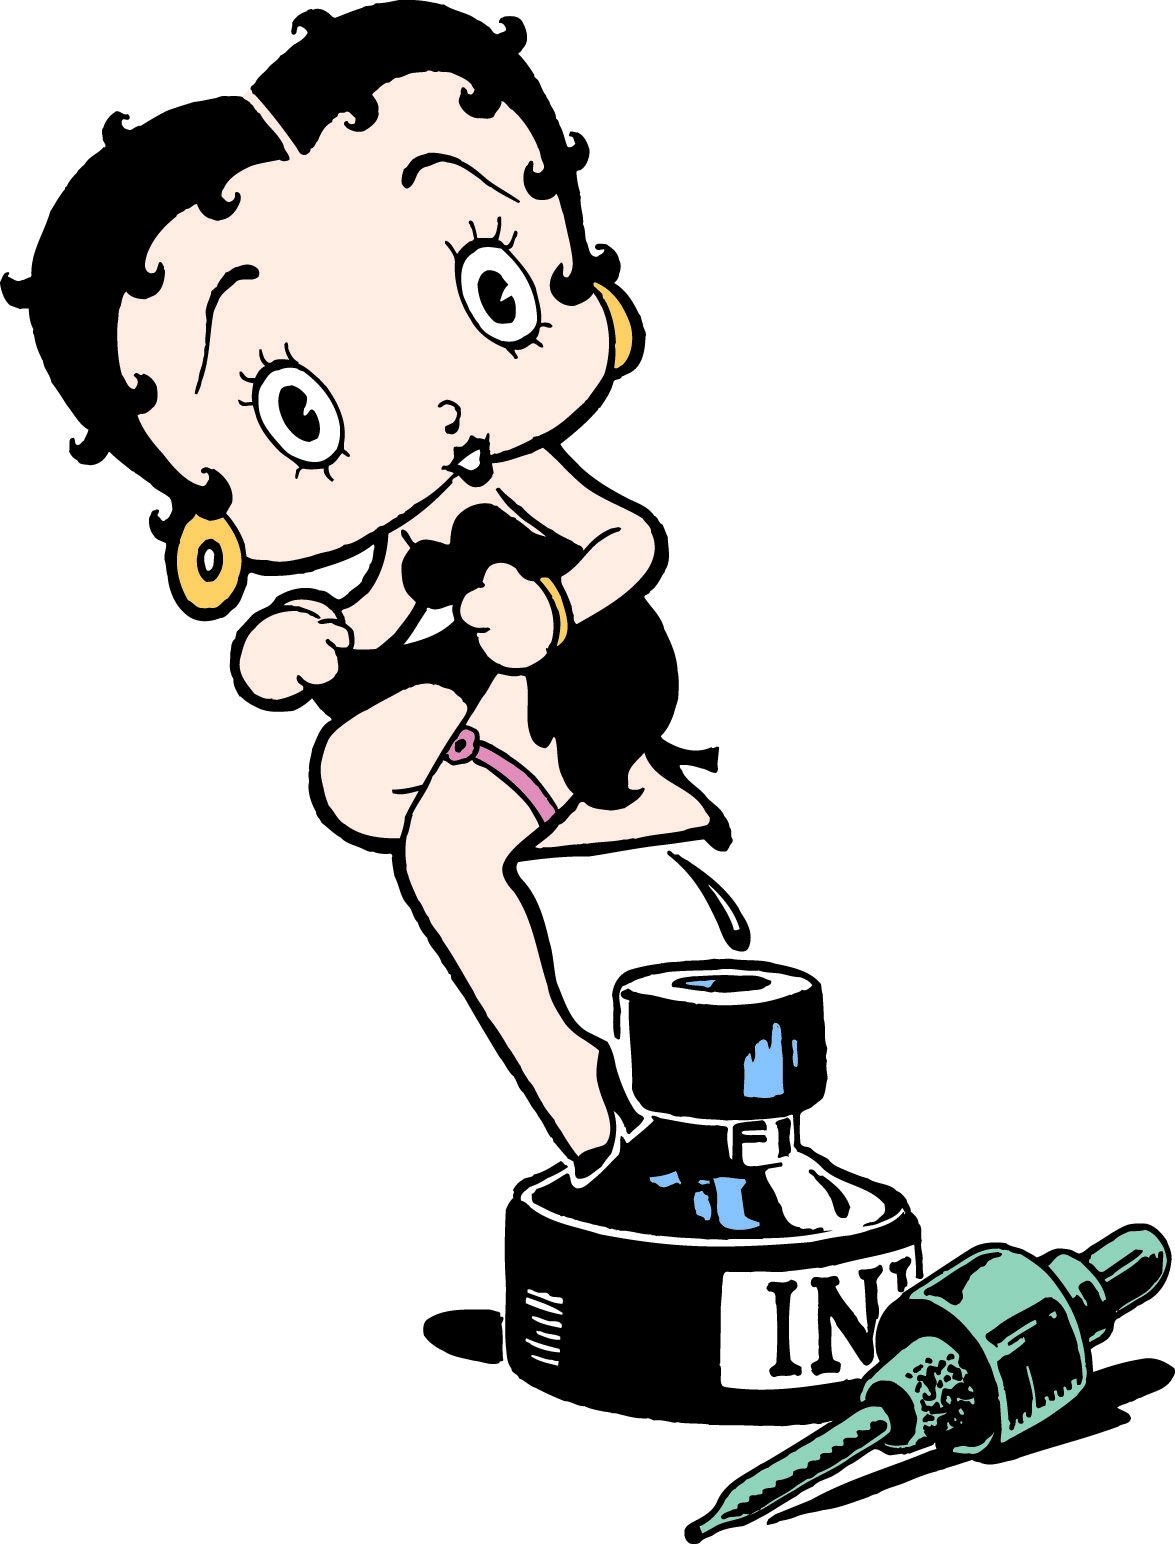 betty boop is not only a cartoon she was a sex symbol during her time